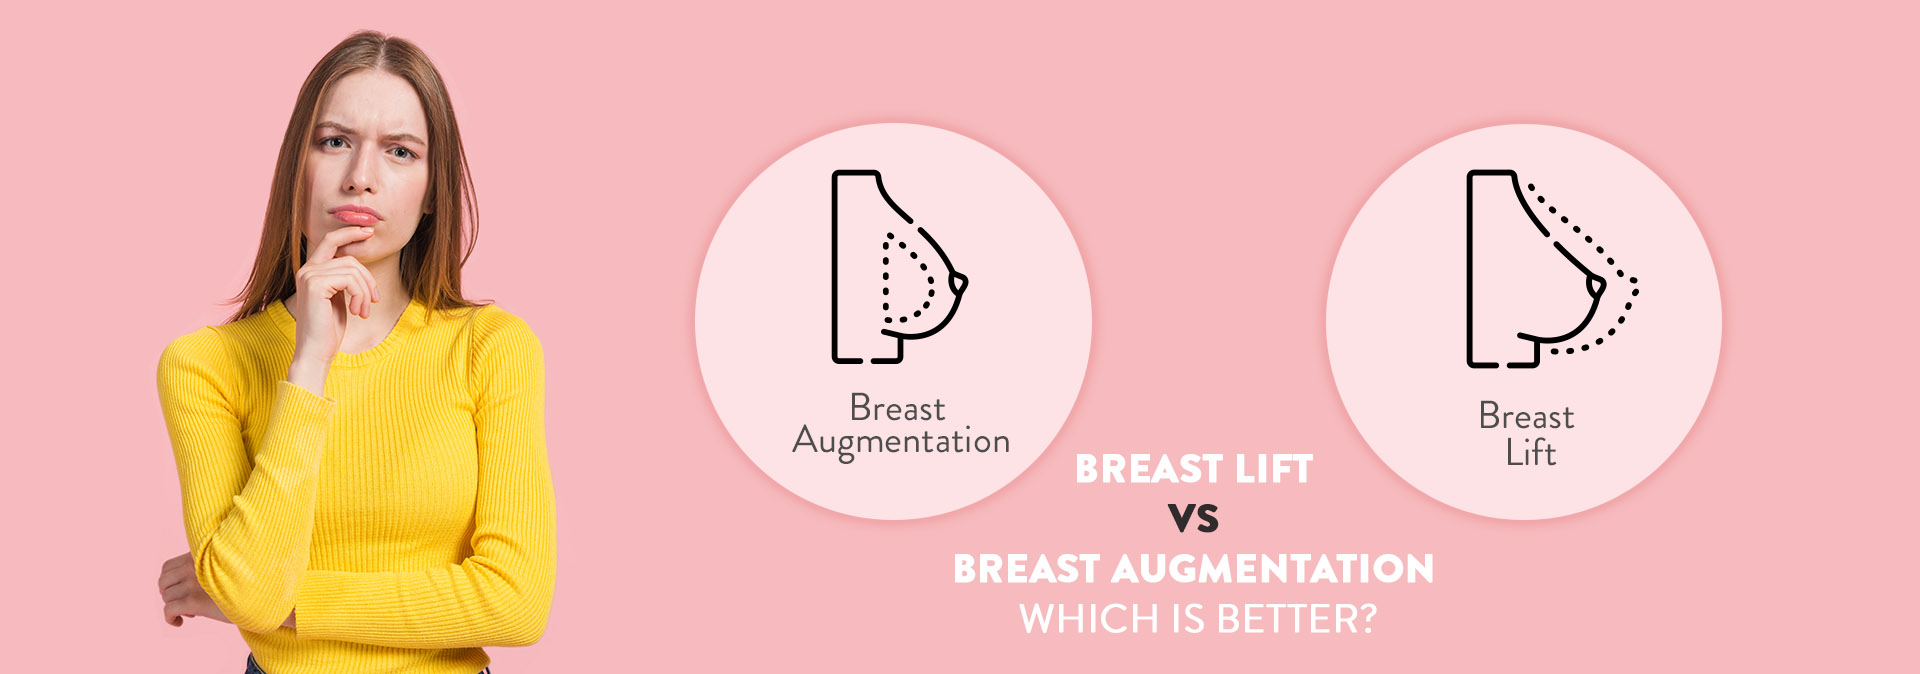 Breast lift vs Breast augmentation – which is better?